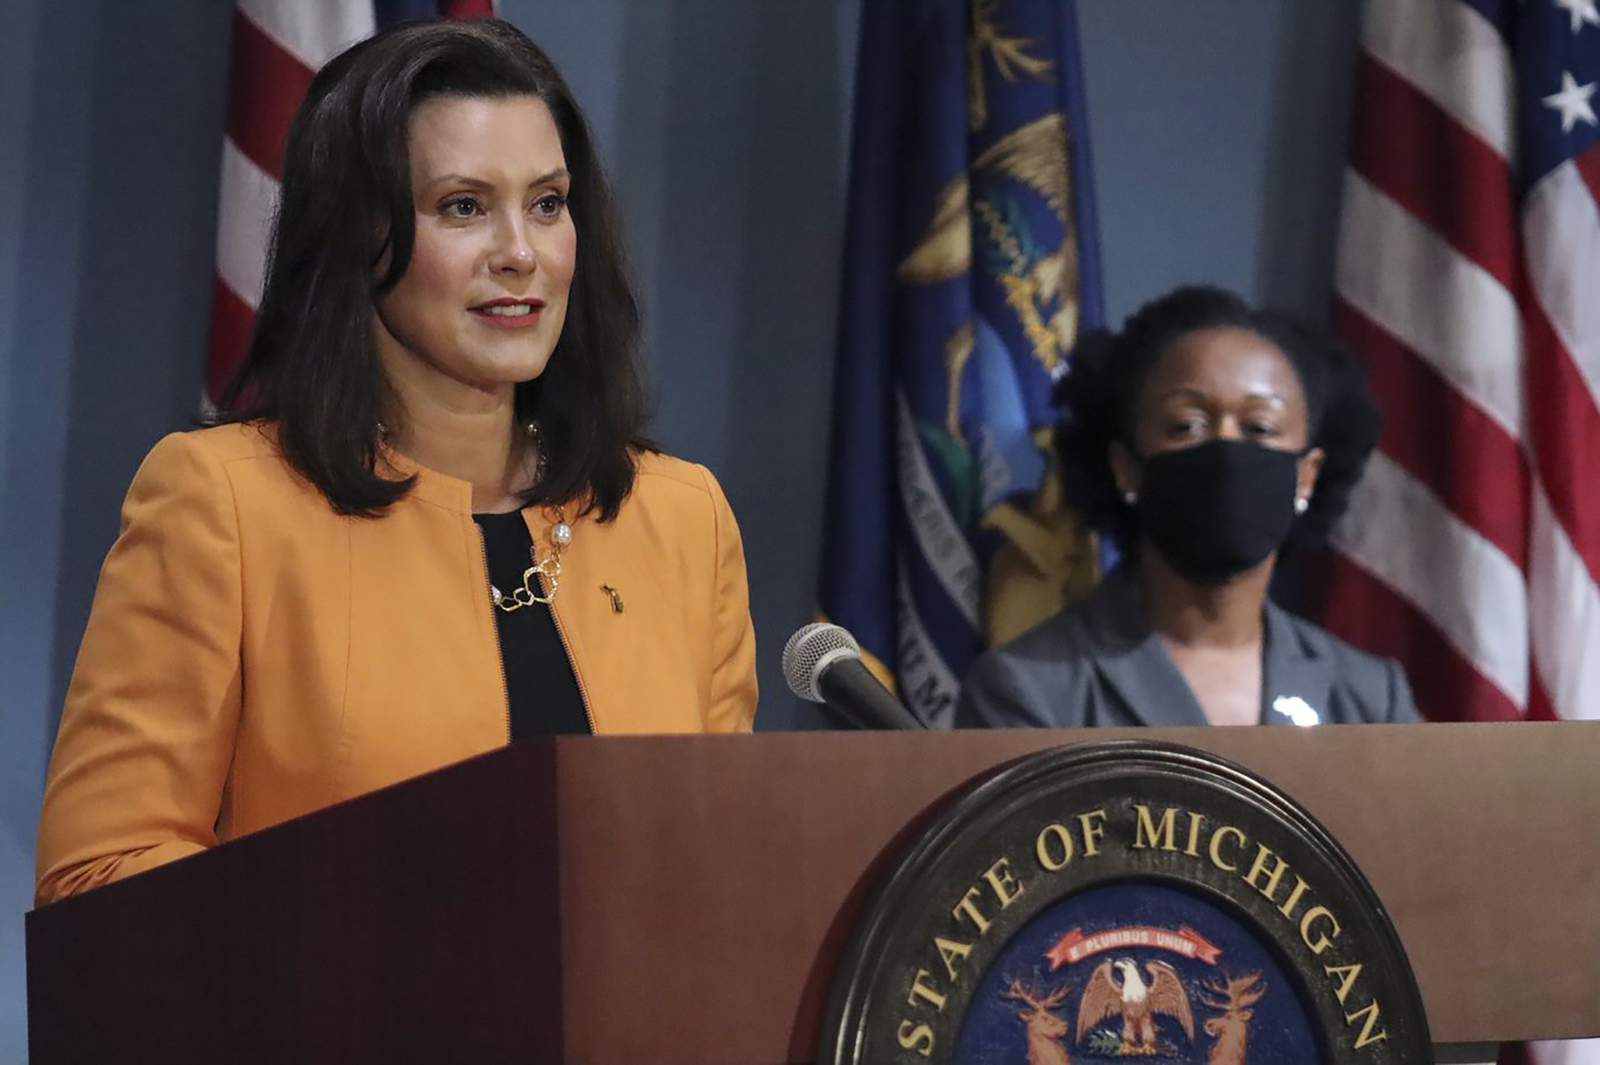 Feds ask Gov. Whitmer for Michigan nursing home data to see if COVID-19 response warrants investigation